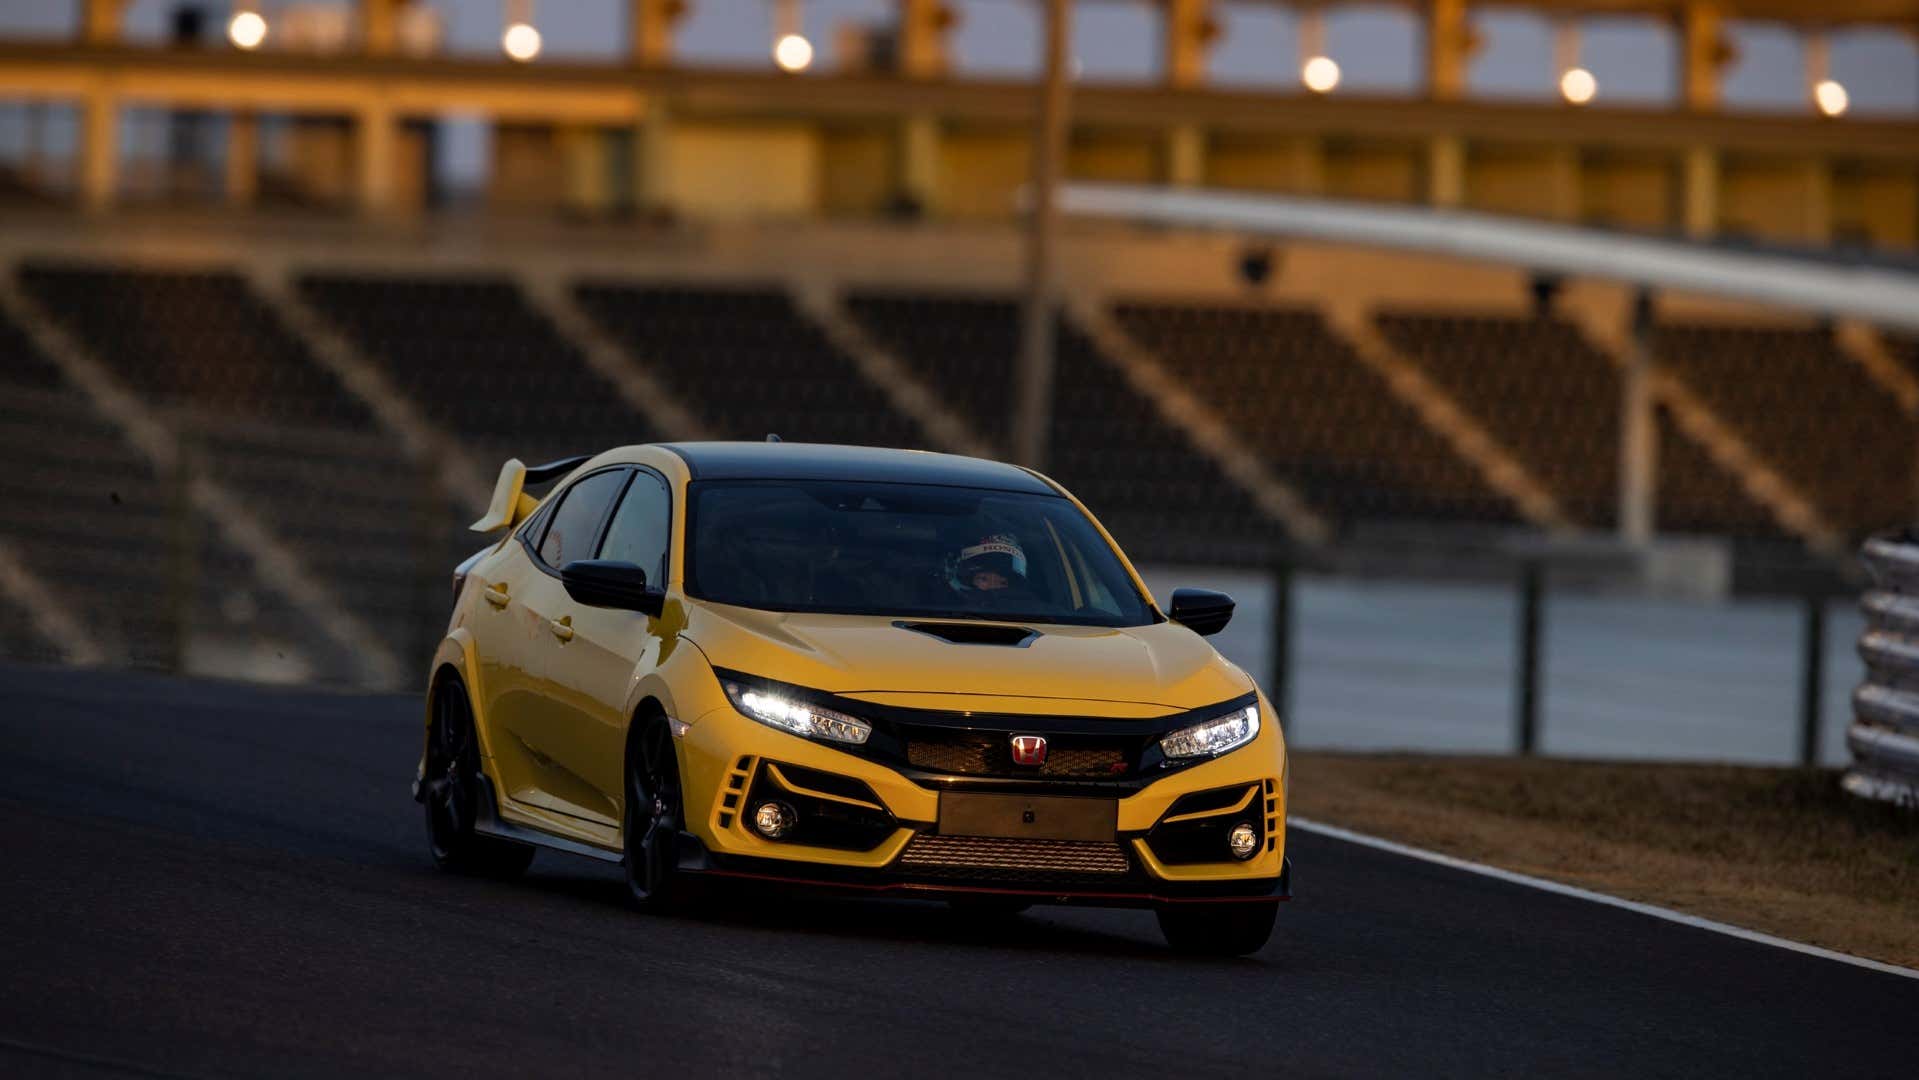 21 Honda Civic Type R Limited Edition Is Lighter Grippier And Very Yellow